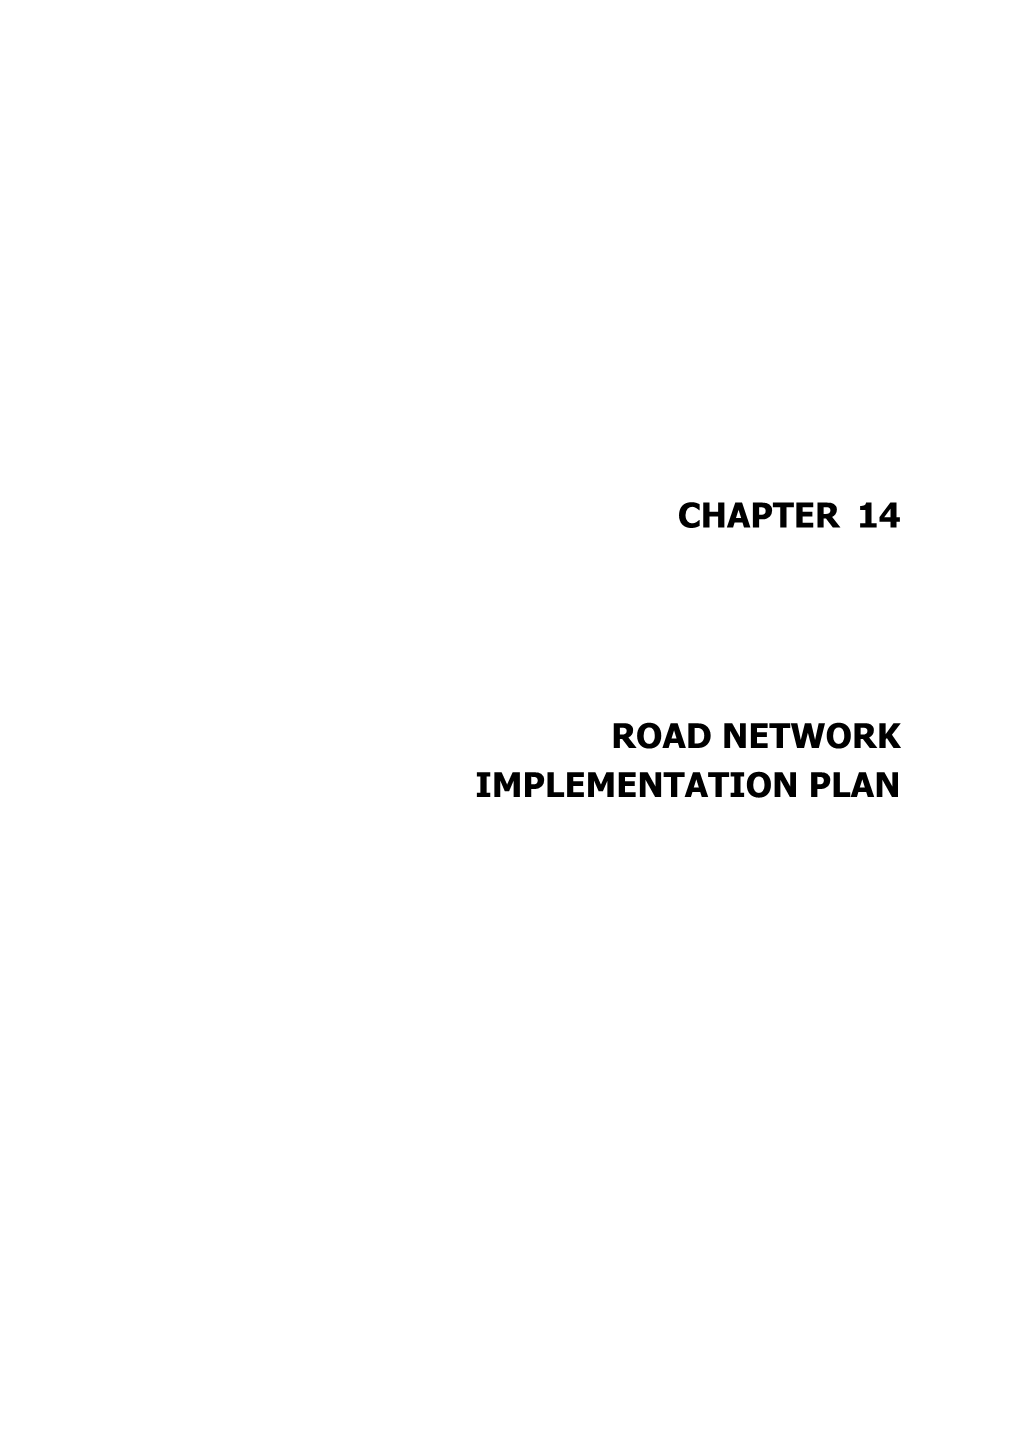 Chapter 14 Road Network Implementation Plan